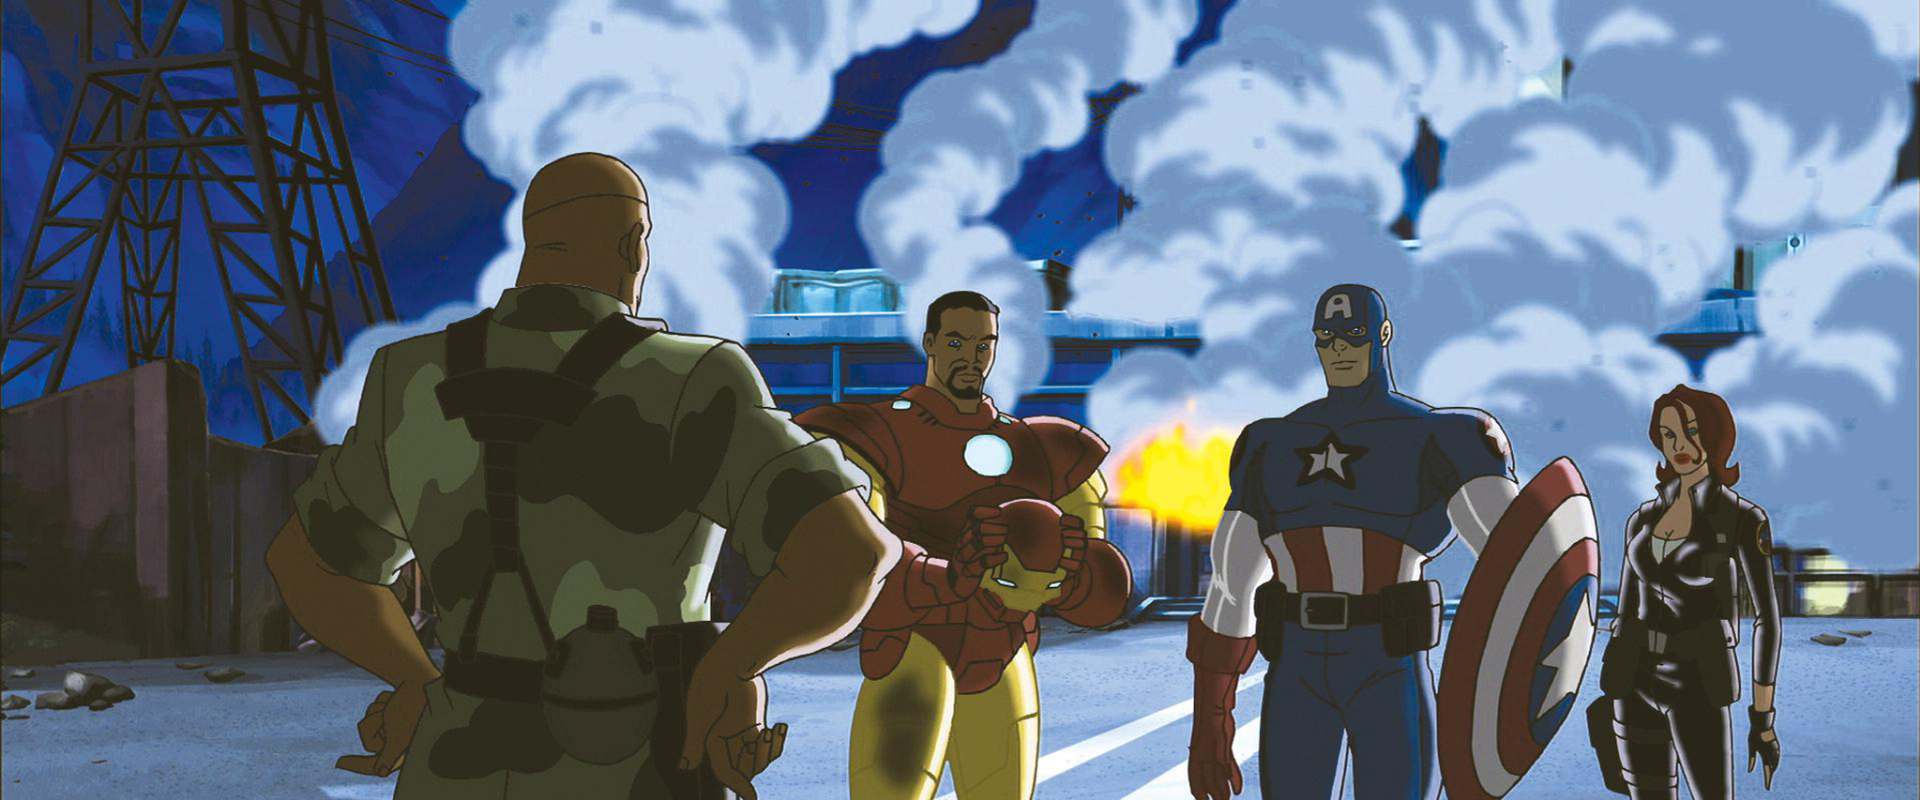 Ultimate Avengers: The Movie background 1